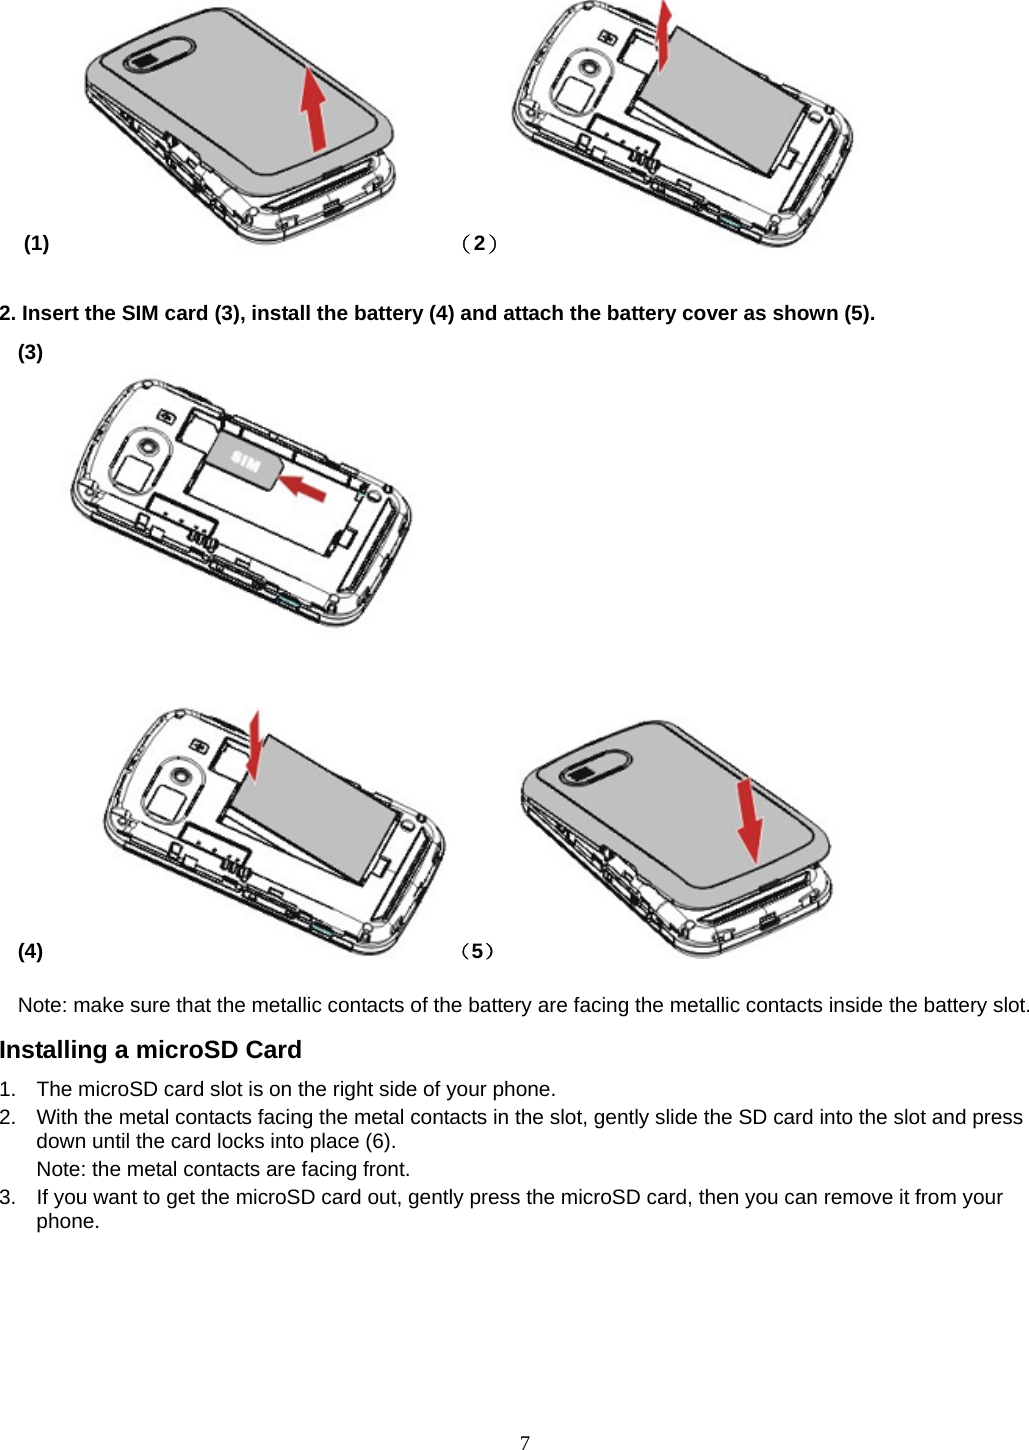 7 (1)       （2）                  2. Insert the SIM card (3), install the battery (4) and attach the battery cover as shown (5). (3)                                                                              (4)     （5）           Note: make sure that the metallic contacts of the battery are facing the metallic contacts inside the battery slot. Installing a microSD Card 1.  The microSD card slot is on the right side of your phone. 2.  With the metal contacts facing the metal contacts in the slot, gently slide the SD card into the slot and press down until the card locks into place (6). Note: the metal contacts are facing front. 3.  If you want to get the microSD card out, gently press the microSD card, then you can remove it from your phone. 